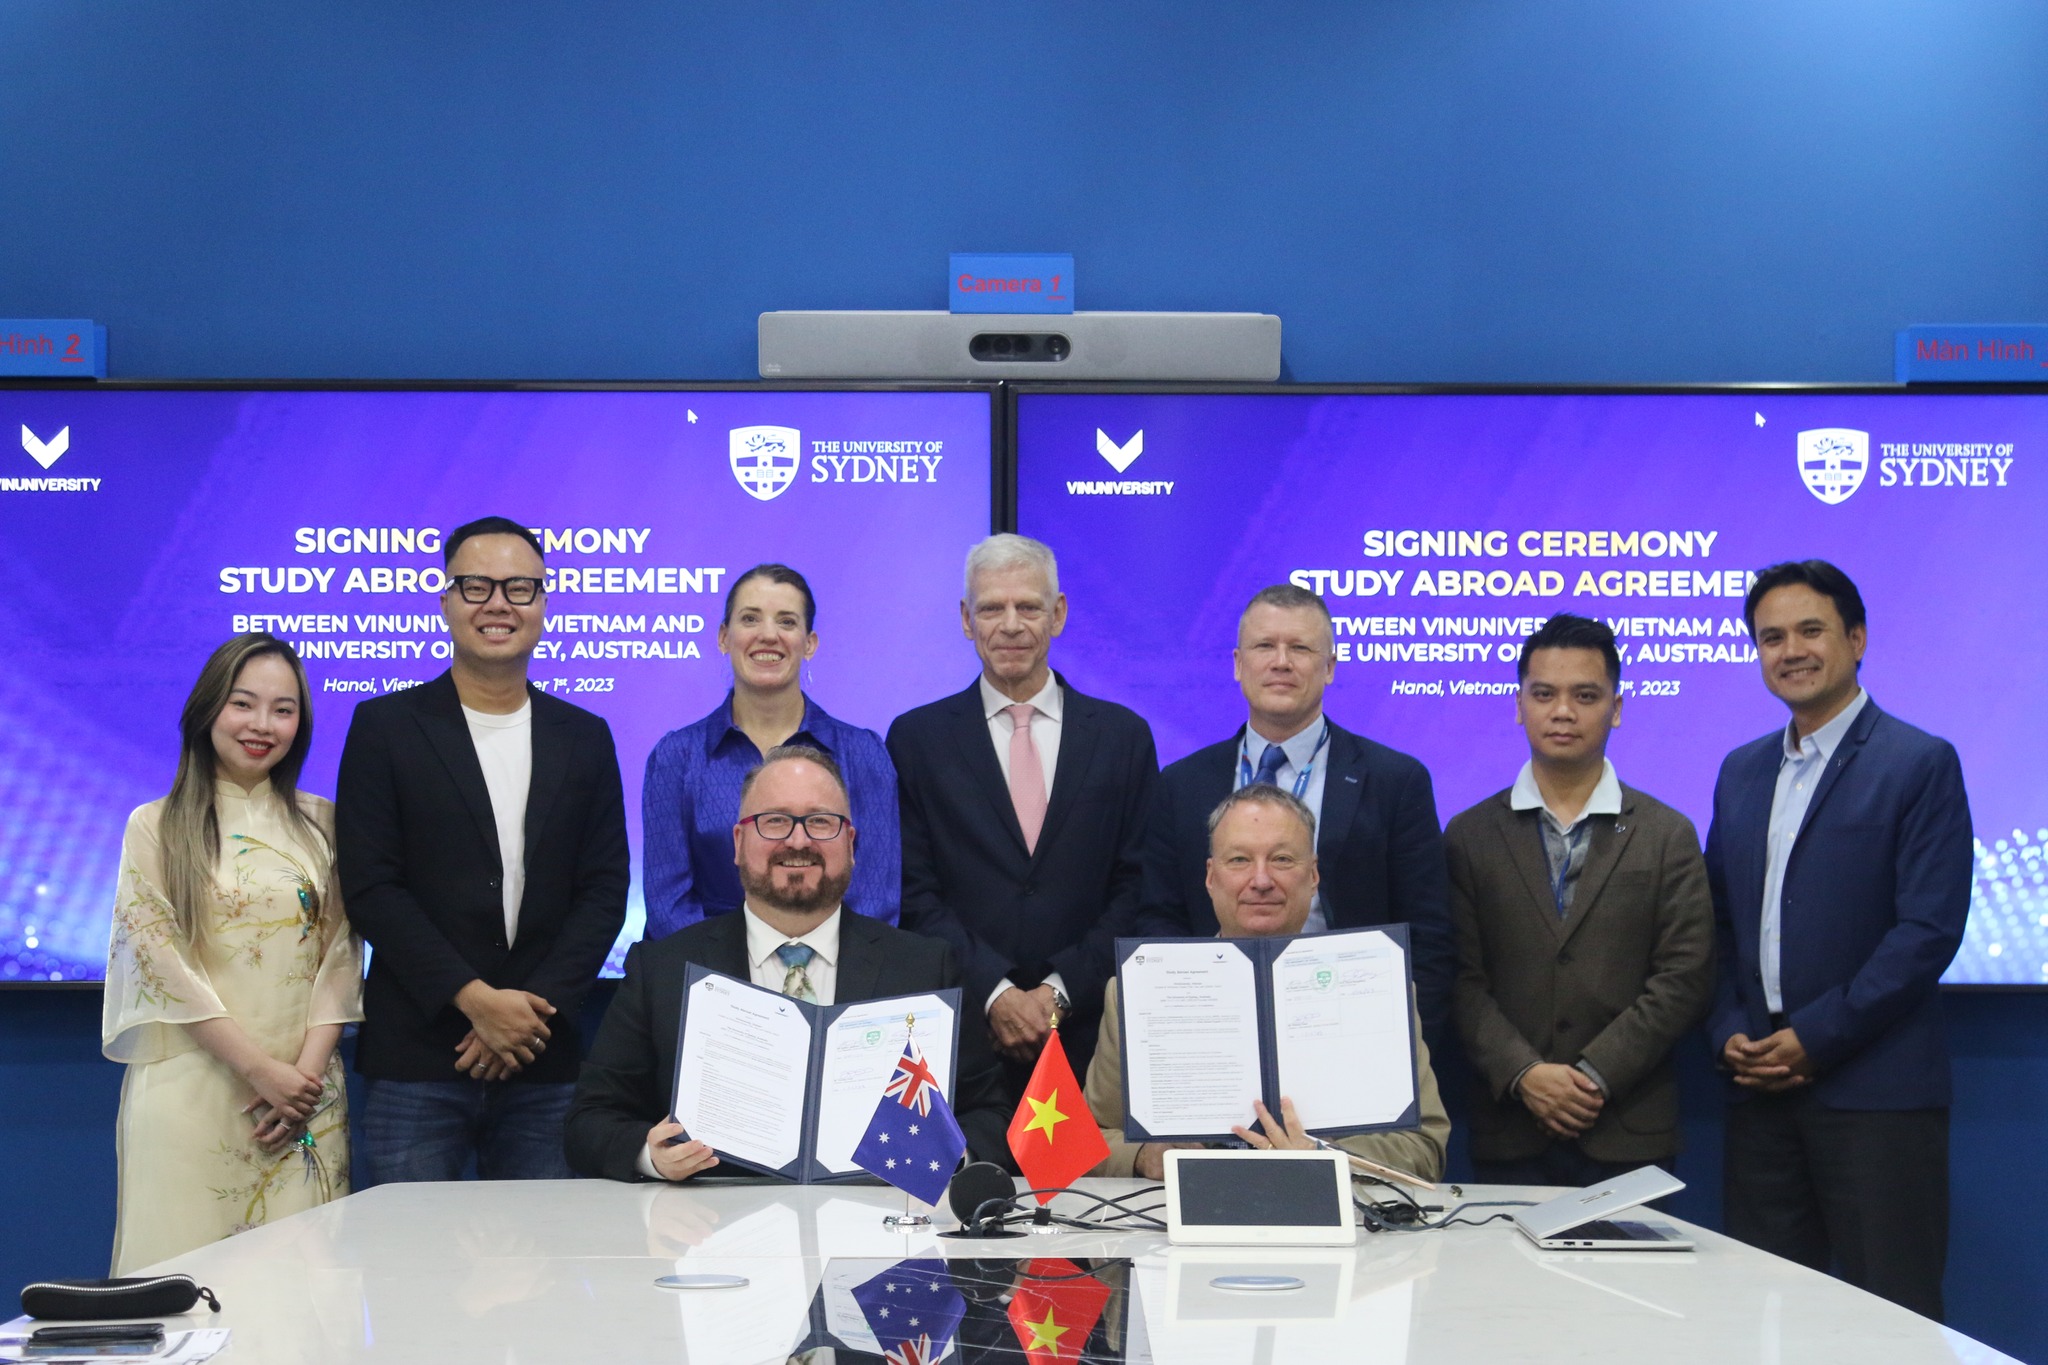 VinUniversity proudly became University of Sydney’s first partner in the world to sign a Study Abroad Agreement with tuition and accommodation fees waiver